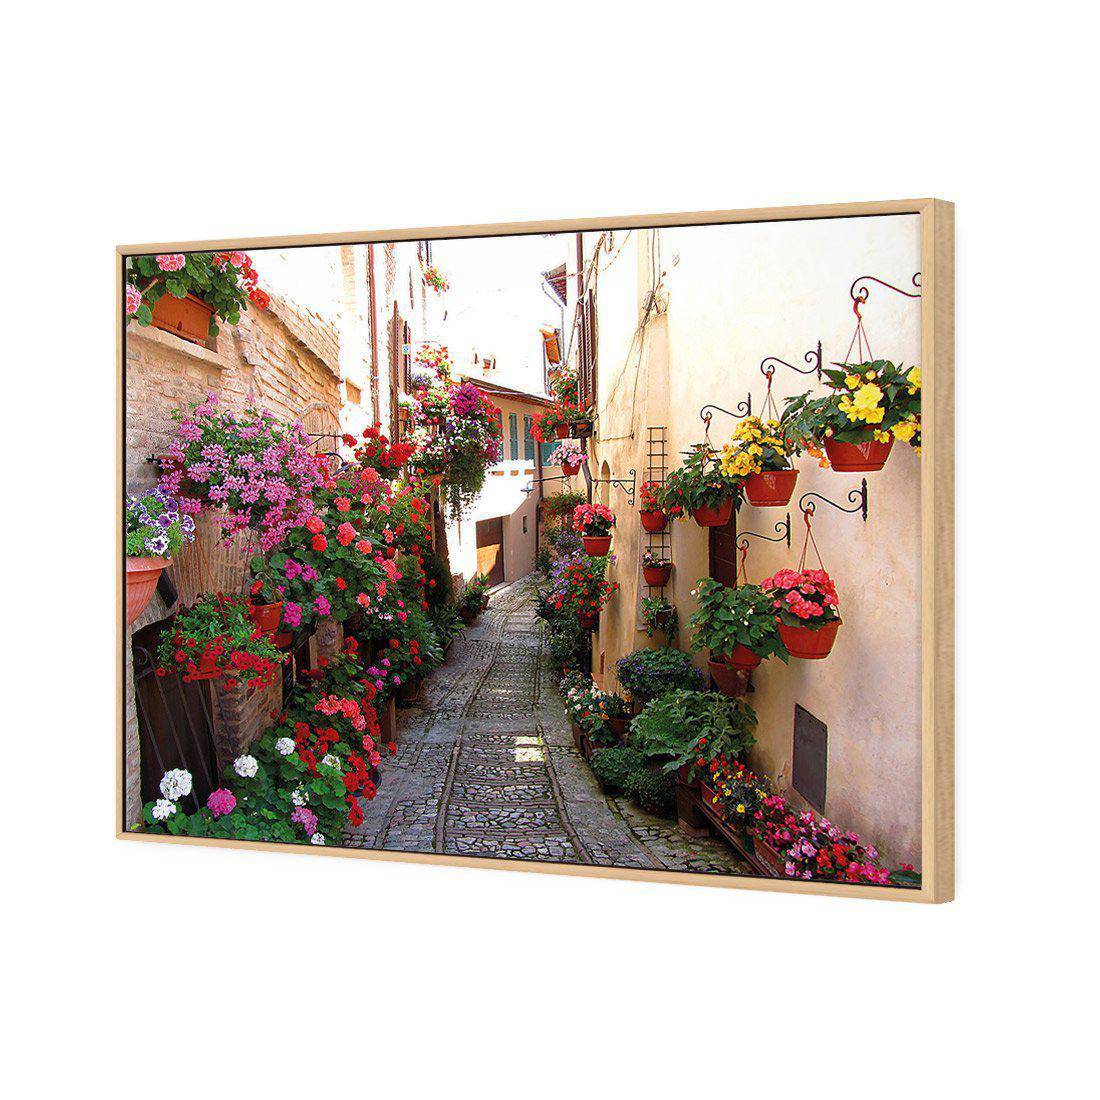 Floral Alley In Italy Canvas Art-Canvas-Wall Art Designs-45x30cm-Canvas - Oak Frame-Wall Art Designs